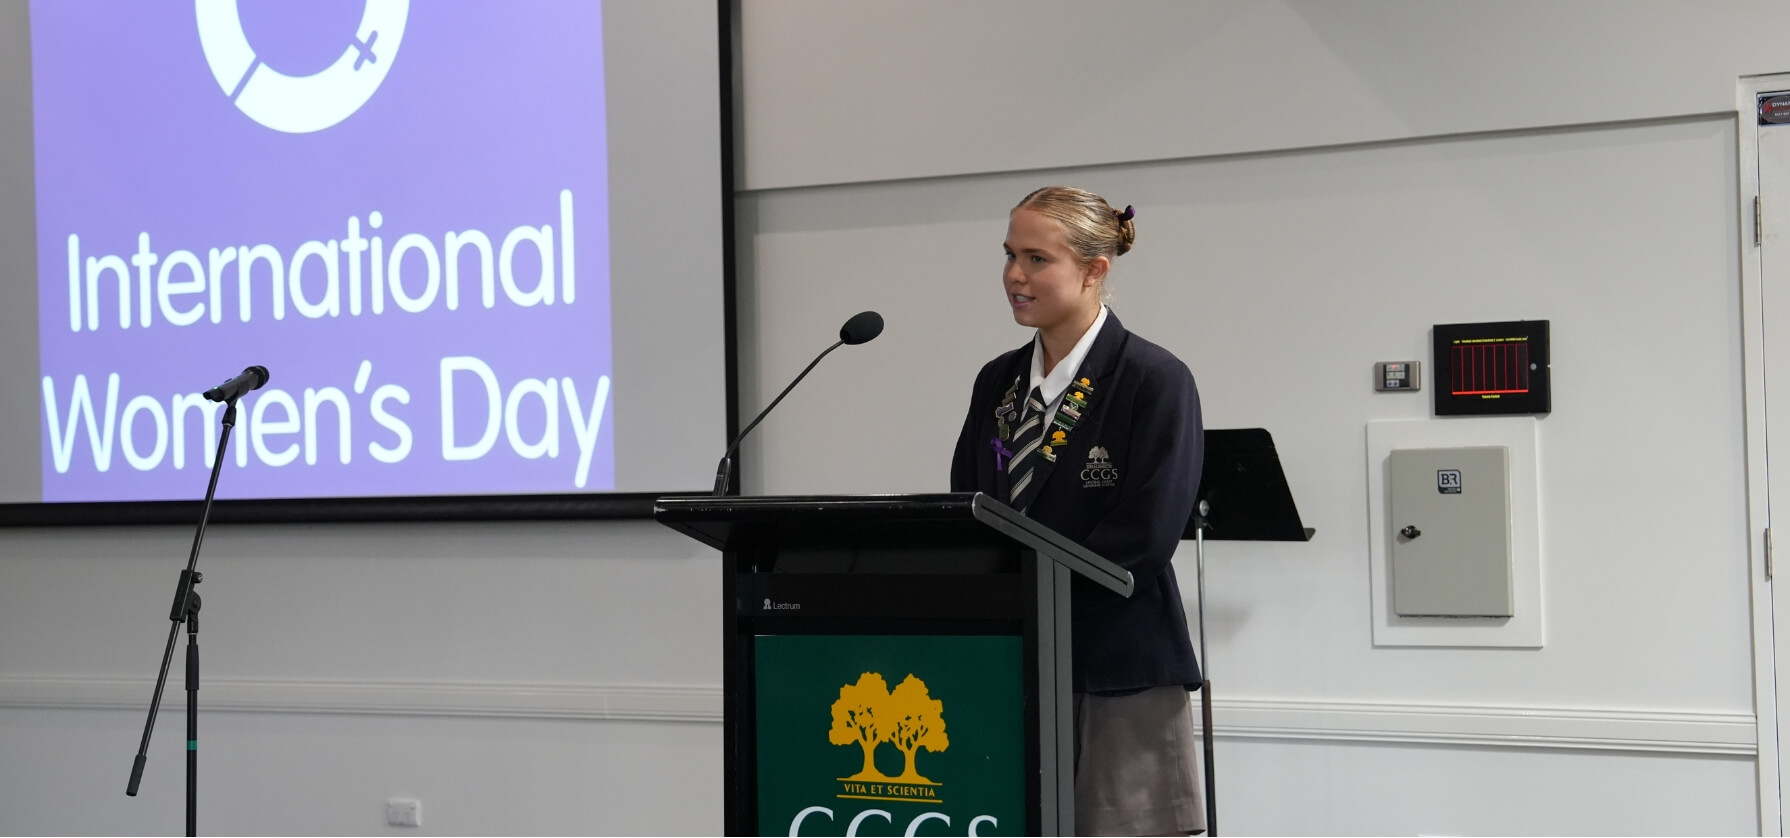  Year 12 student Lana gives a moving speech